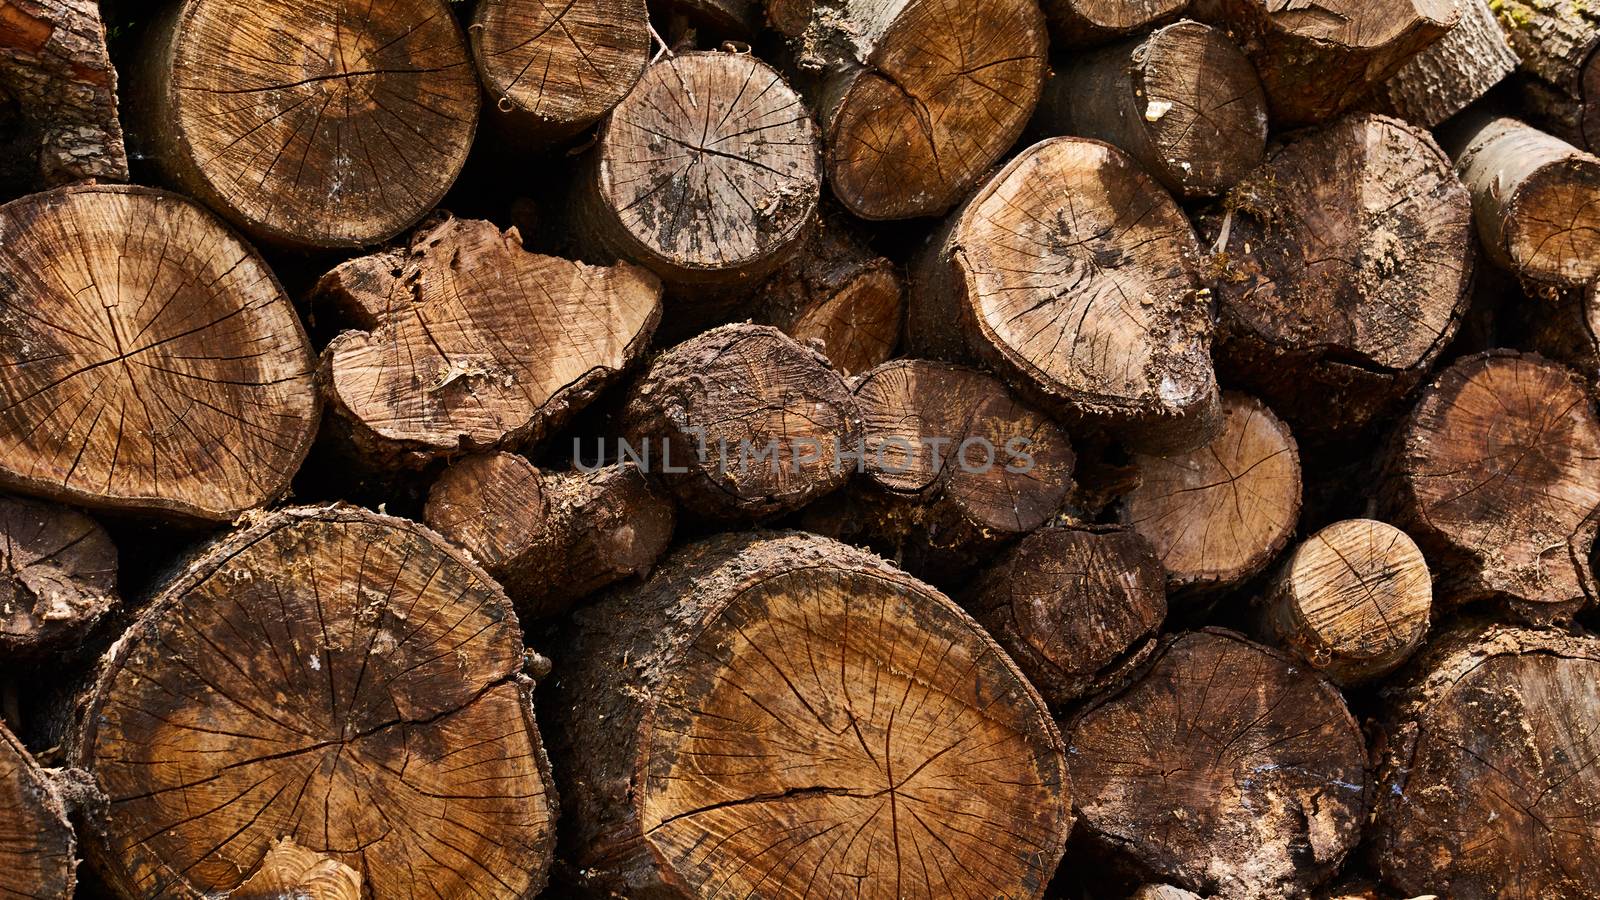 Dry firewood in a pile for furnace kindling by sarymsakov